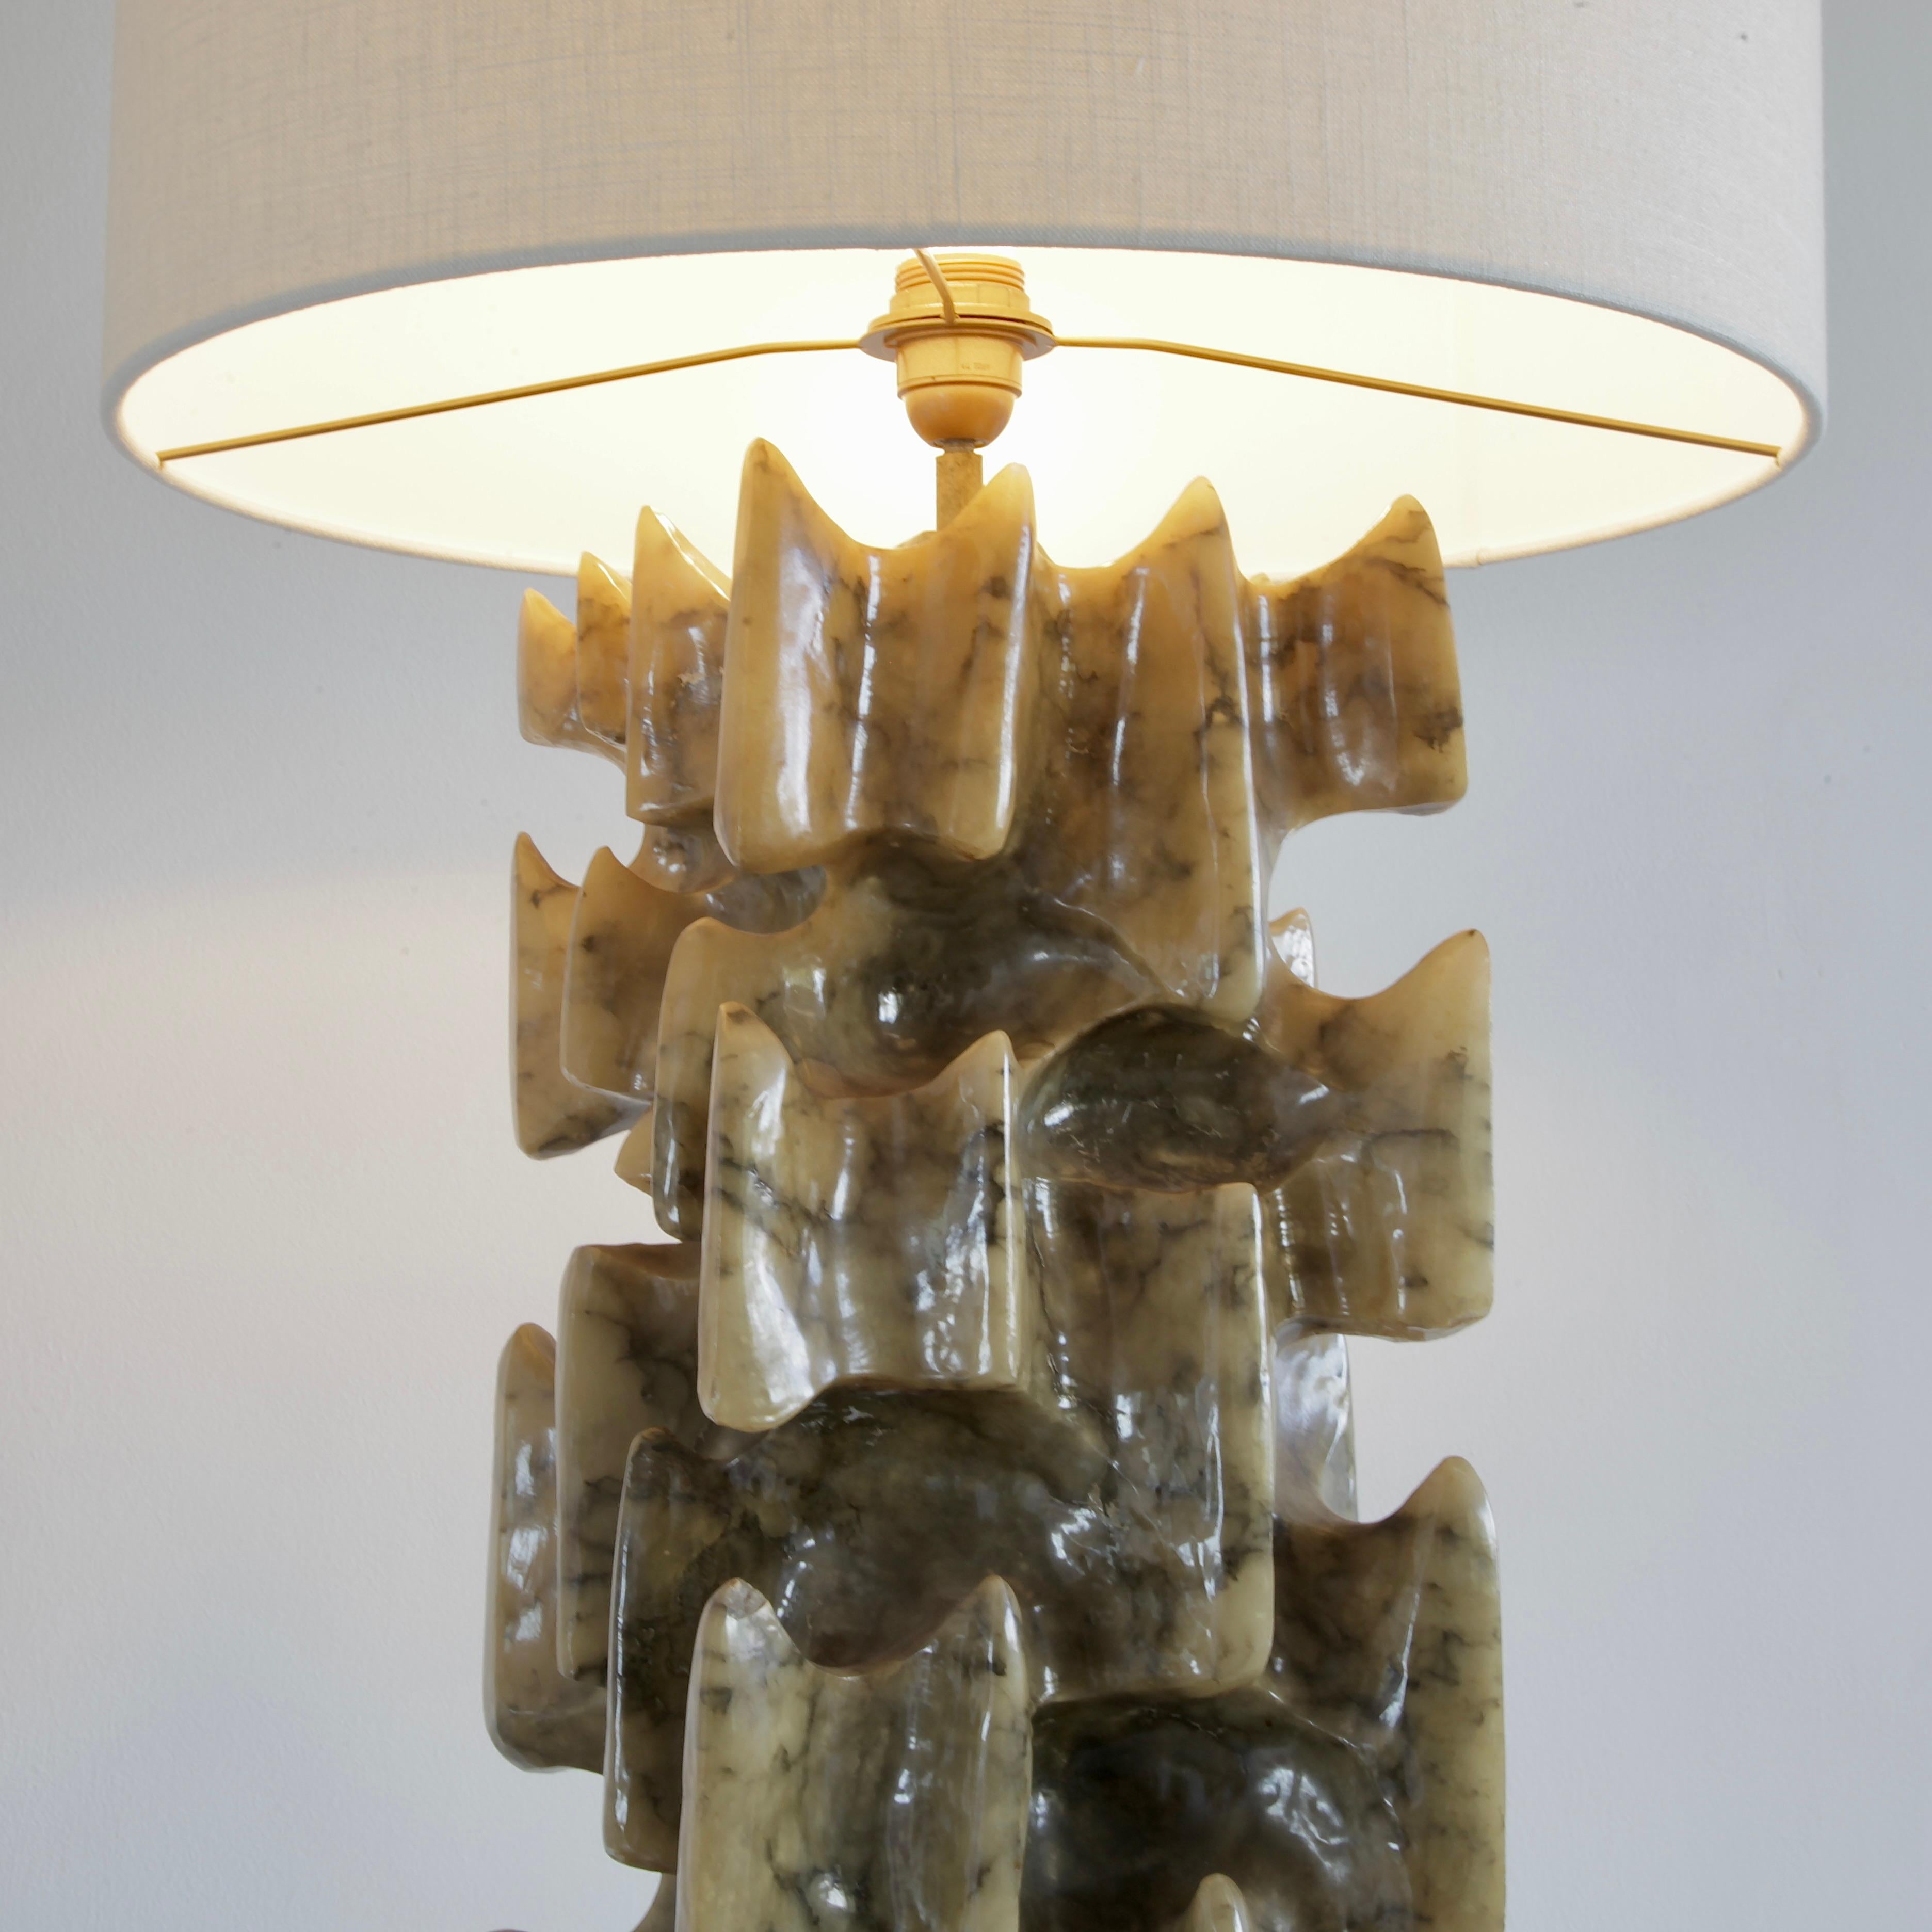 Vintage green Alabaster Lamp. Italy, 1960s/1970s.

Beautifully crafted large lamp base with organic hand-carved design, polished. Centre stem with light socket and a new light cream-coloured silk lampshade.

There are no maker marks or